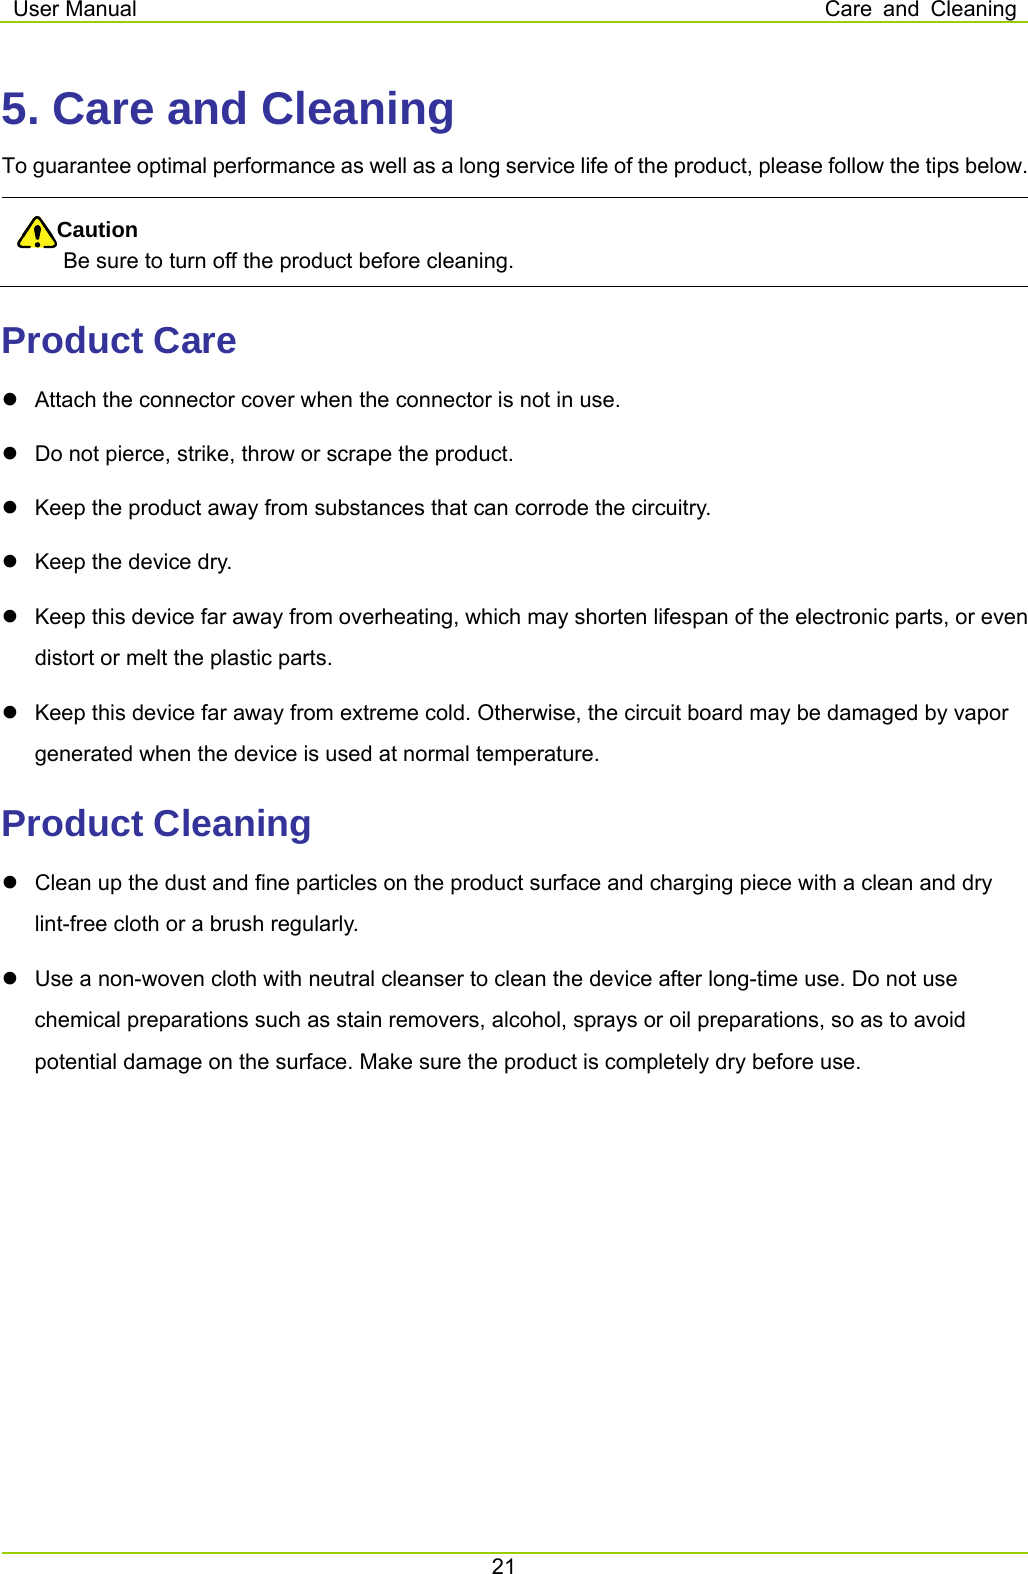 User Manual  Care and Cleaning 21  5. Care and Cleaning To guarantee optimal performance as well as a long service life of the product, please follow the tips below. Caution Be sure to turn off the product before cleaning.   Product Care   Attach the connector cover when the connector is not in use.     Do not pierce, strike, throw or scrape the product.     Keep the product away from substances that can corrode the circuitry.   Keep the device dry.     Keep this device far away from overheating, which may shorten lifespan of the electronic parts, or even distort or melt the plastic parts.     Keep this device far away from extreme cold. Otherwise, the circuit board may be damaged by vapor generated when the device is used at normal temperature.   Product Cleaning   Clean up the dust and fine particles on the product surface and charging piece with a clean and dry lint-free cloth or a brush regularly.     Use a non-woven cloth with neutral cleanser to clean the device after long-time use. Do not use chemical preparations such as stain removers, alcohol, sprays or oil preparations, so as to avoid potential damage on the surface. Make sure the product is completely dry before use.  